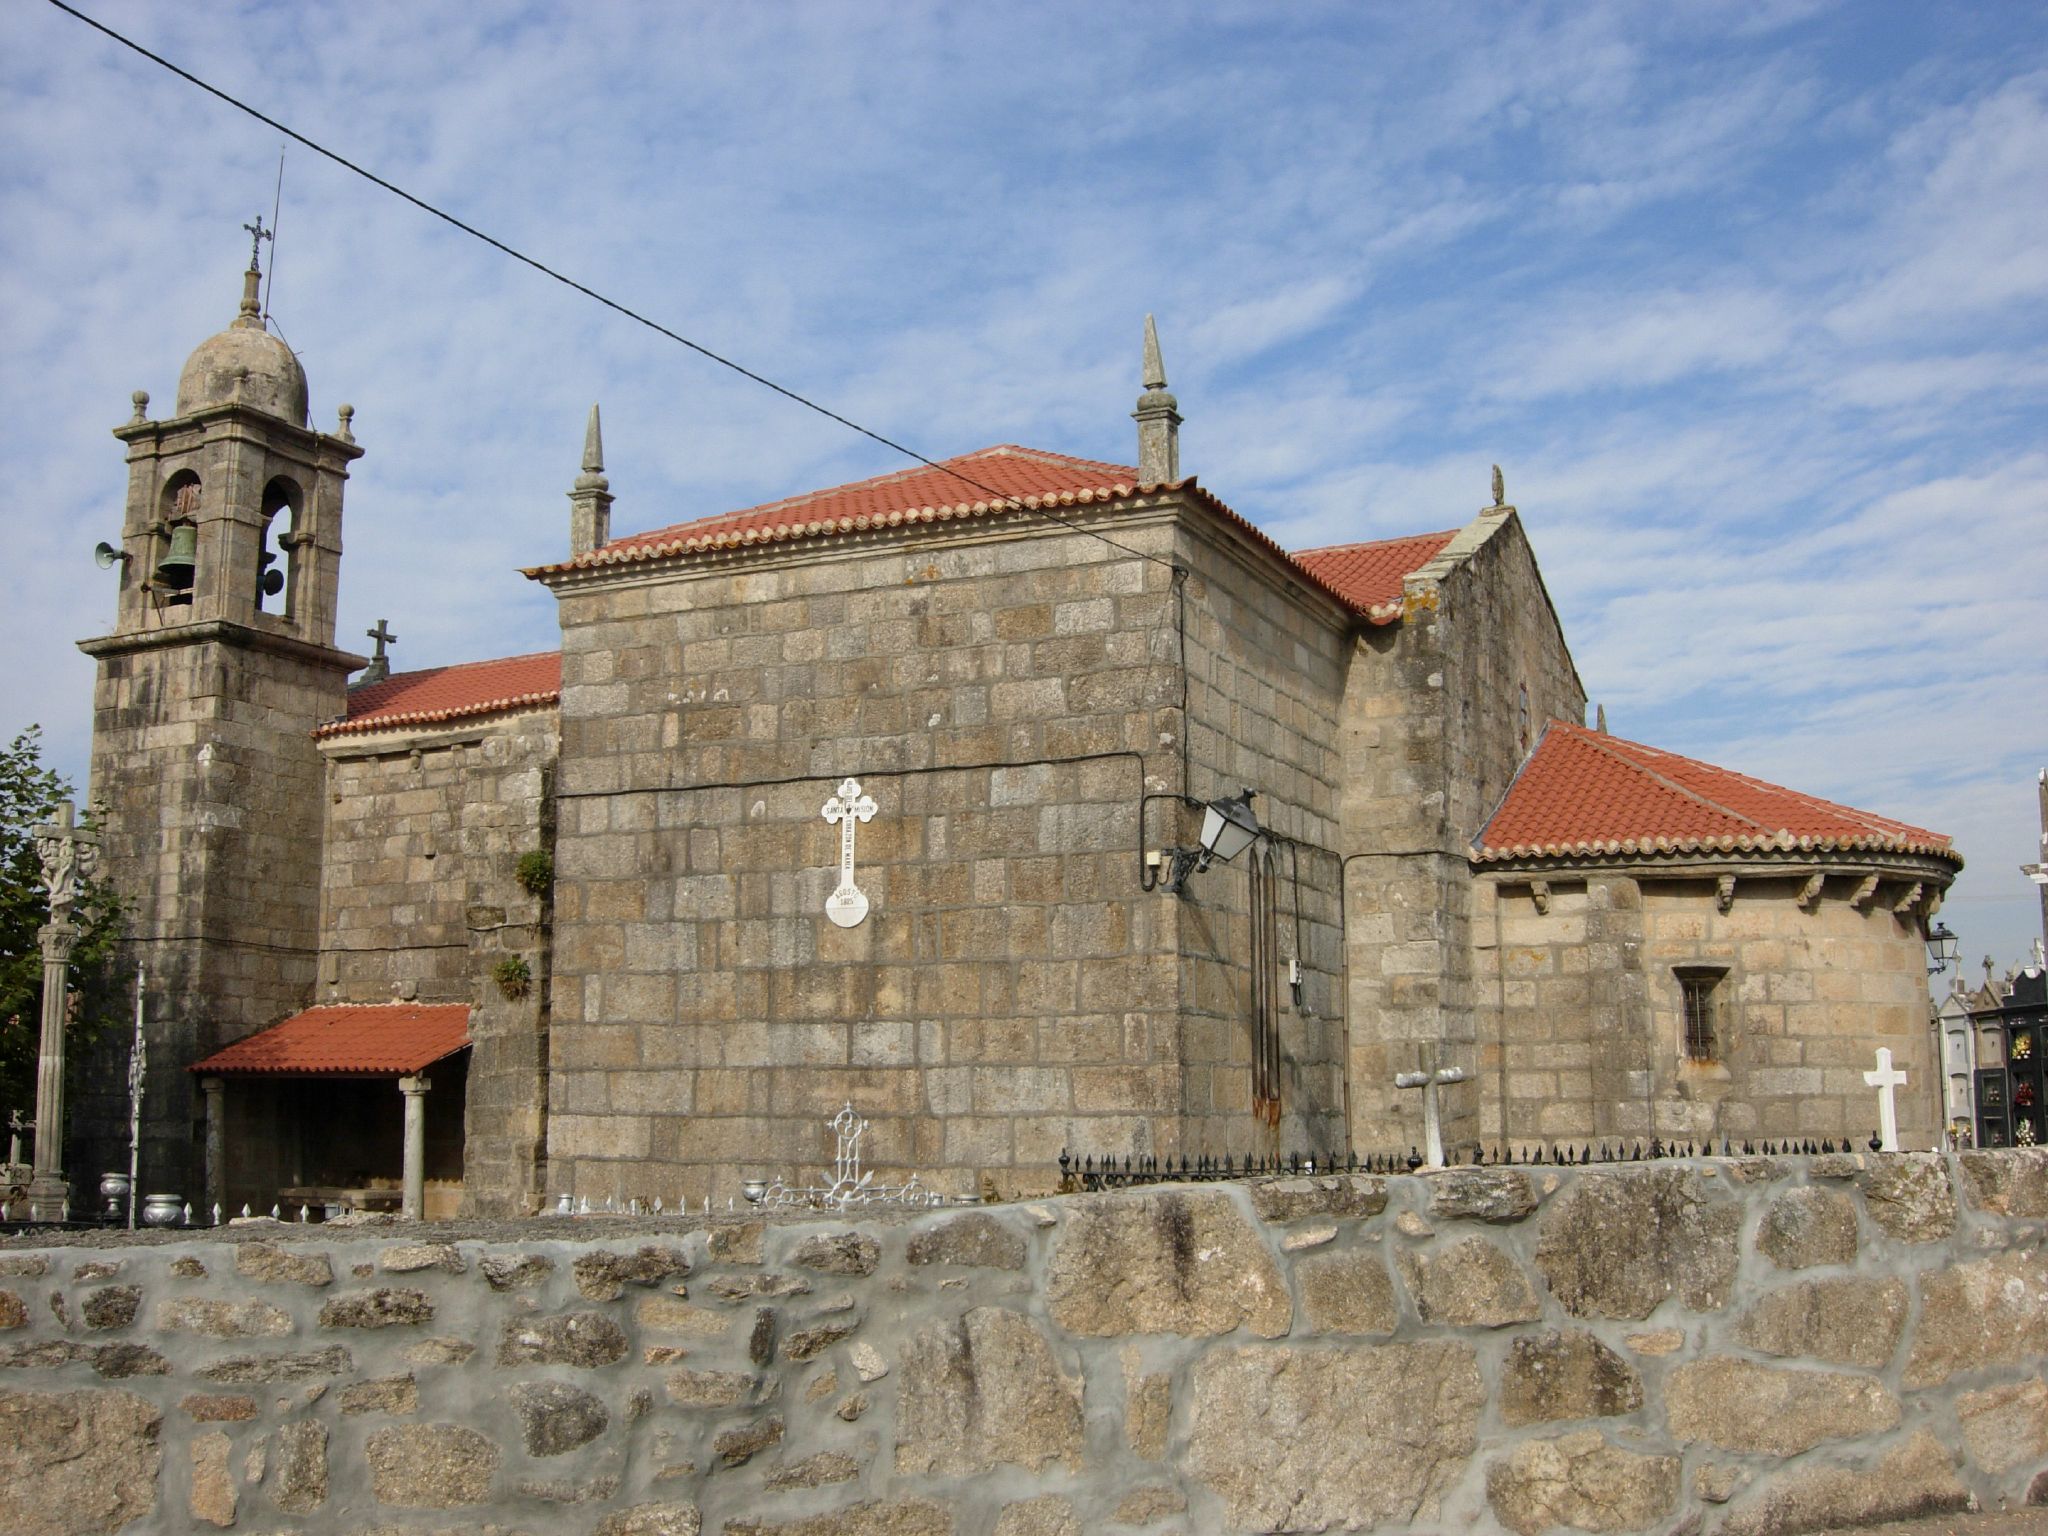 an old church building sitting on top of a stone wall